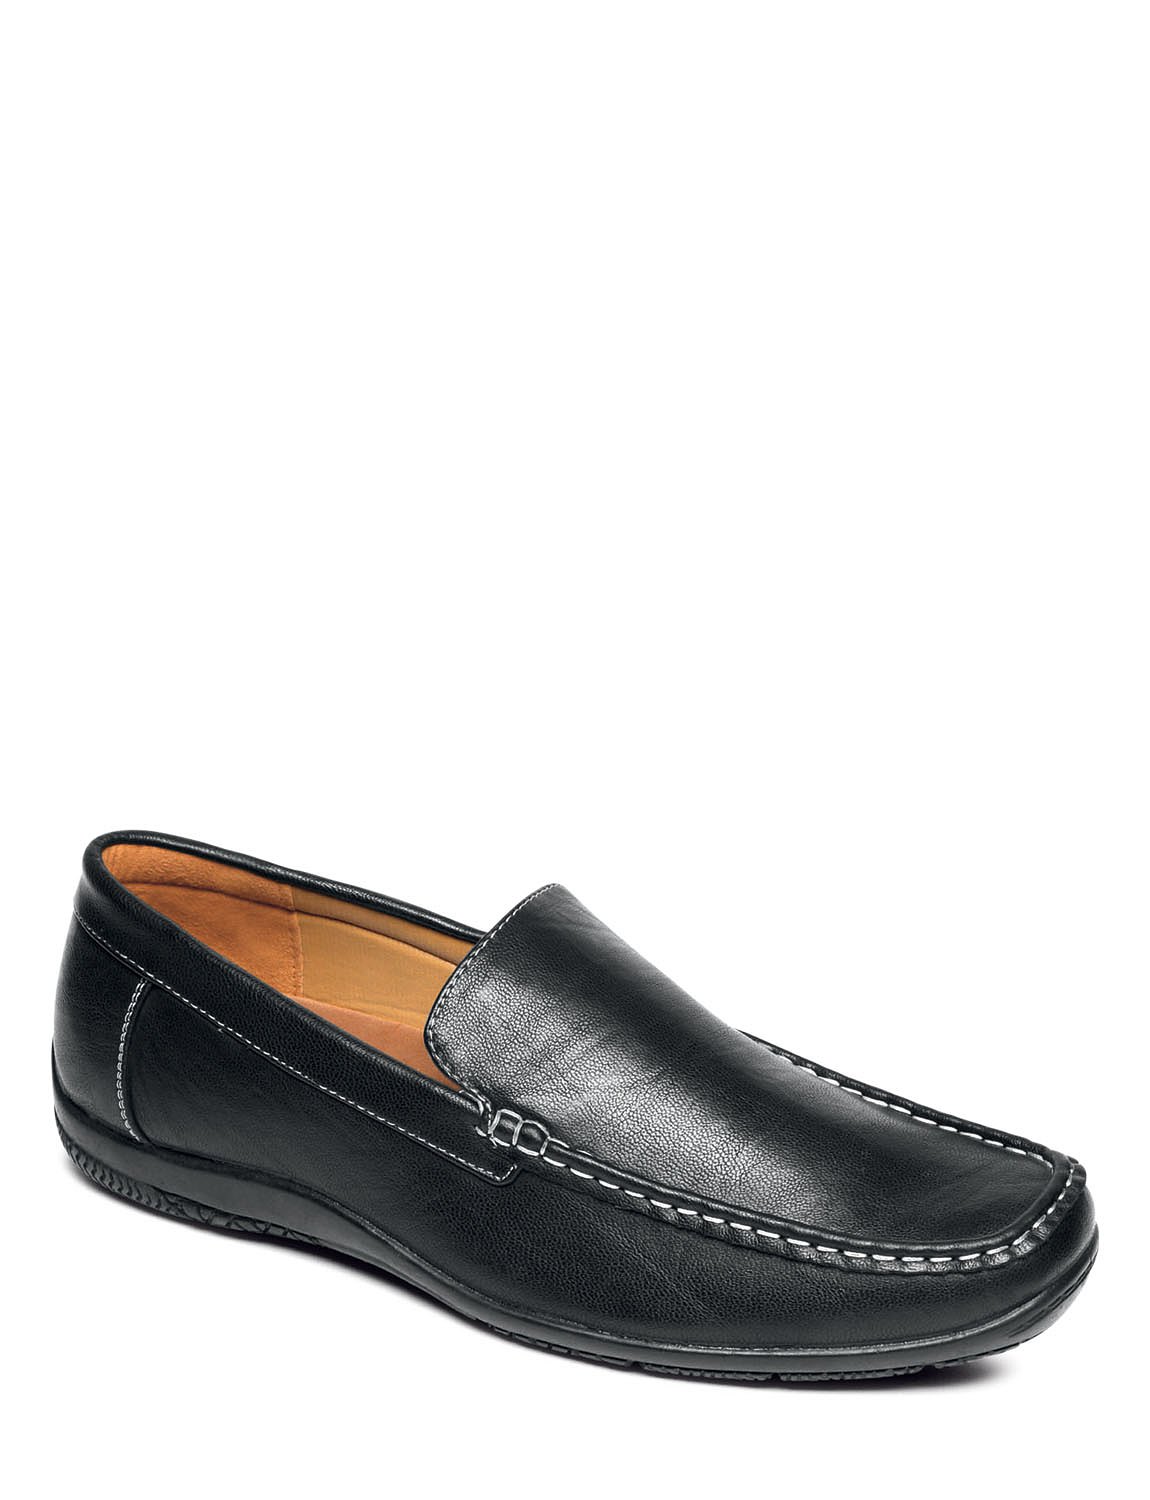 mens wide fit slip on shoes